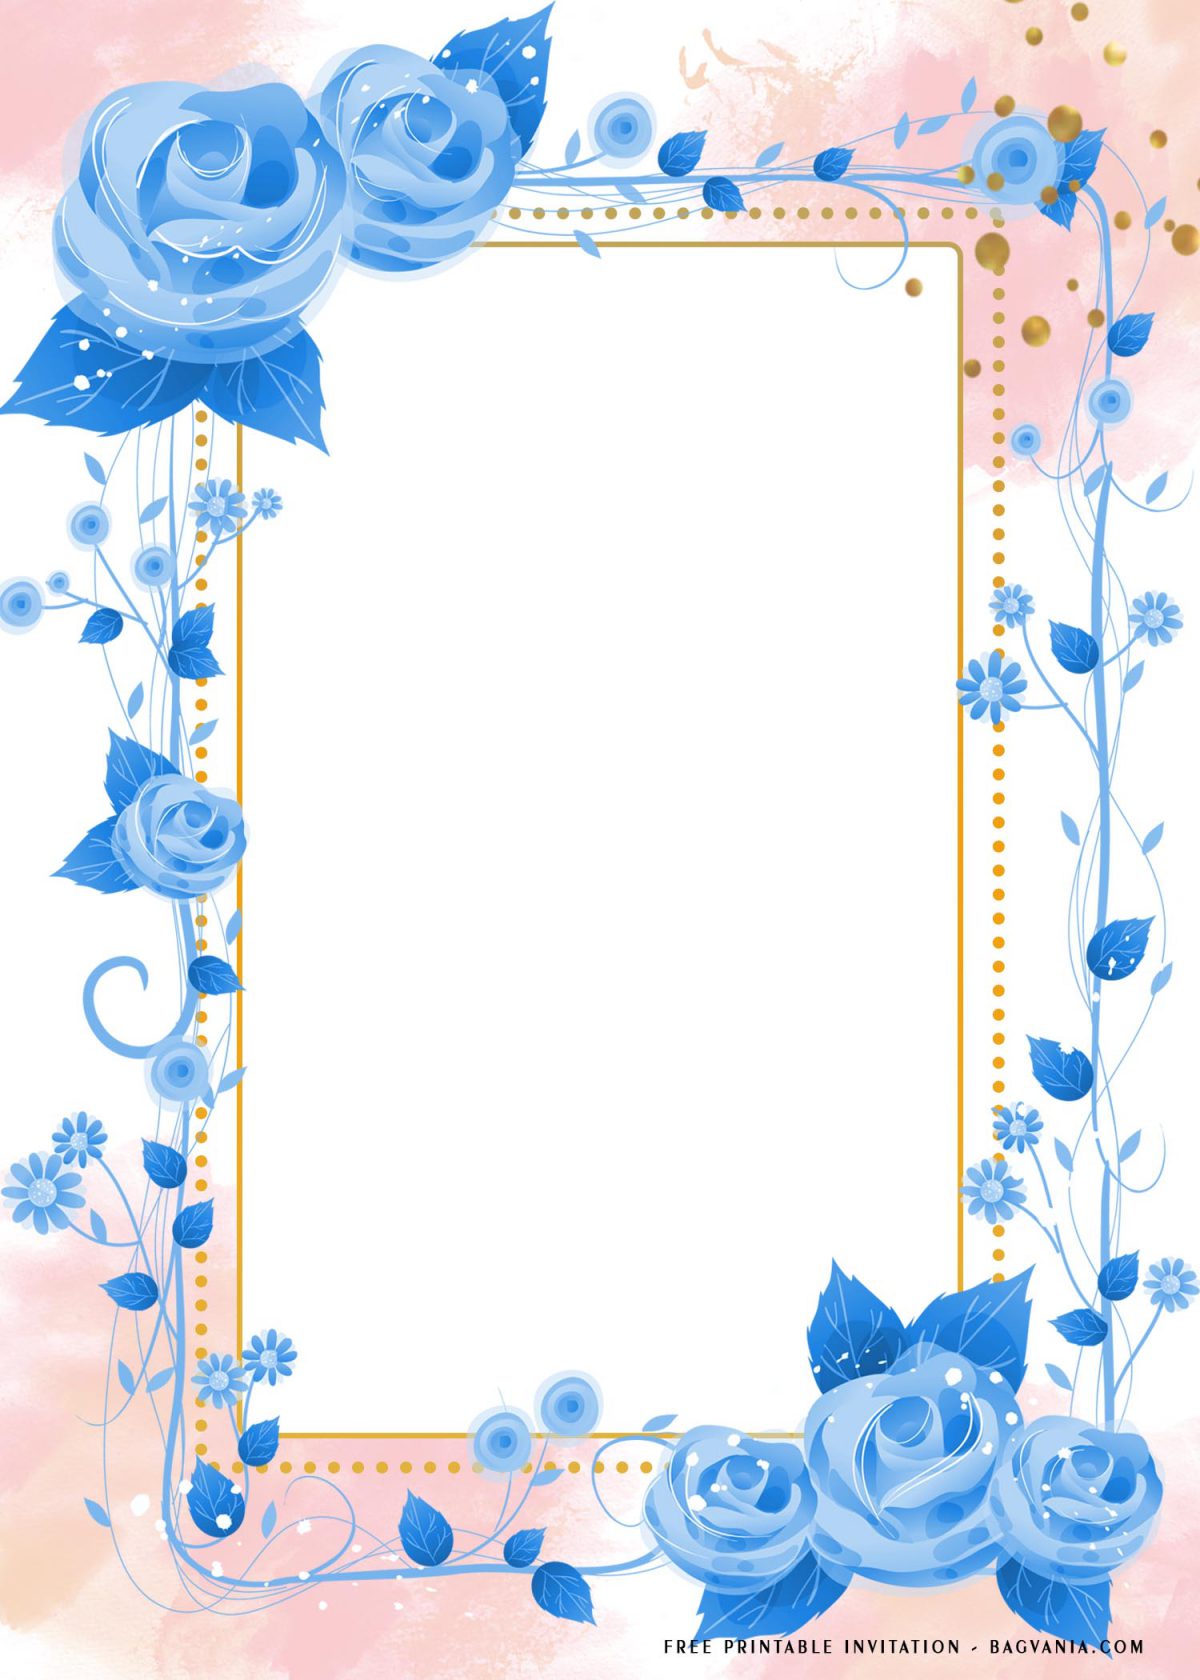 Free Printable Aesthetic Blue Roses Baby Shower Invitation Templates With Blue Roses Surrounding The Text Frame